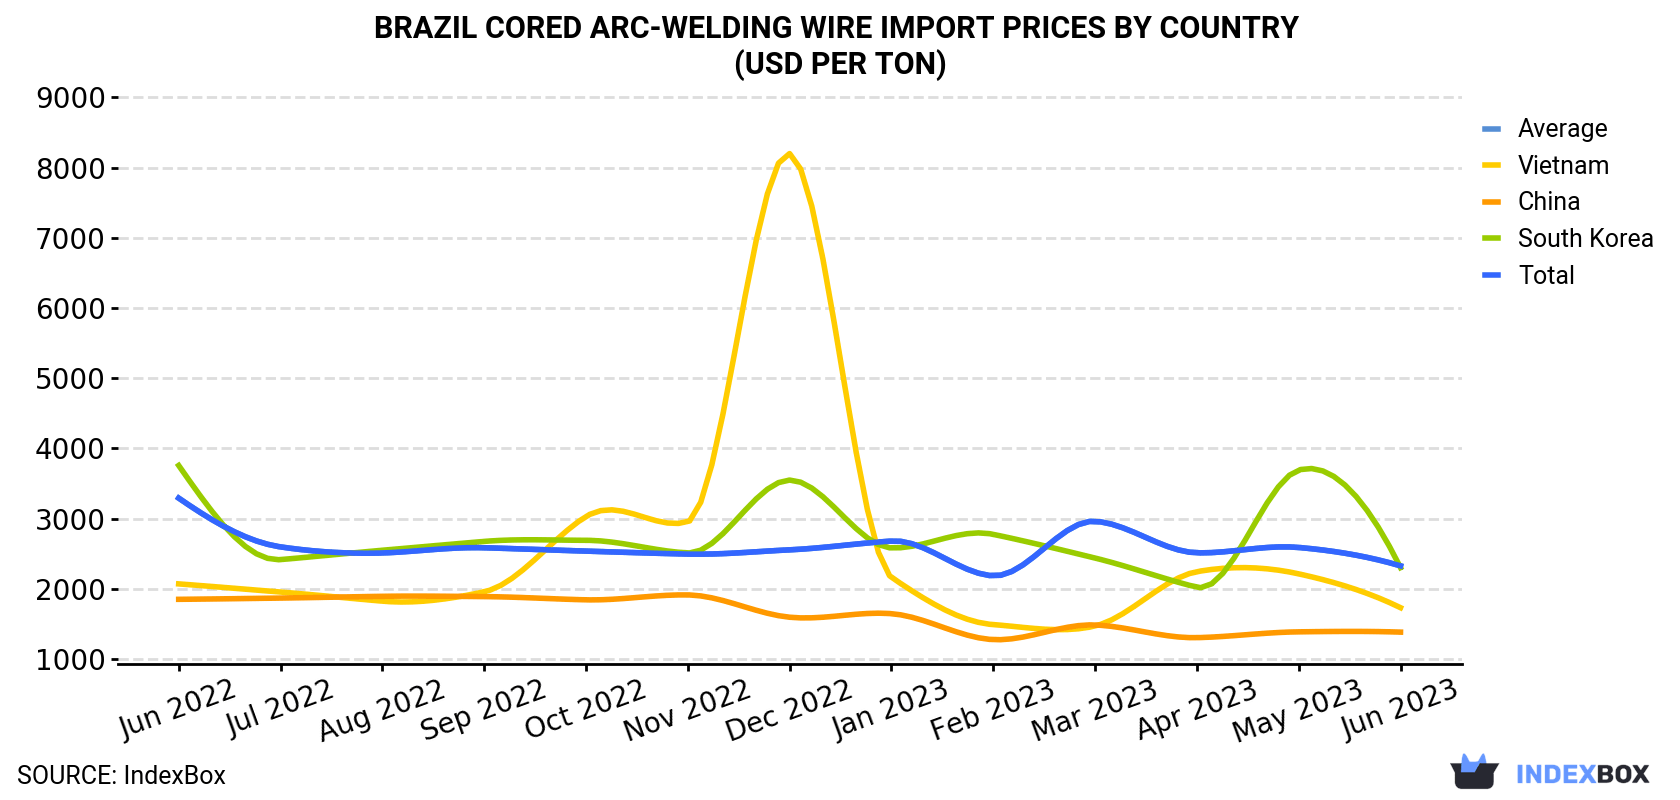 Brazil Cored Arc-Welding Wire Import Prices By Country (USD Per Ton)